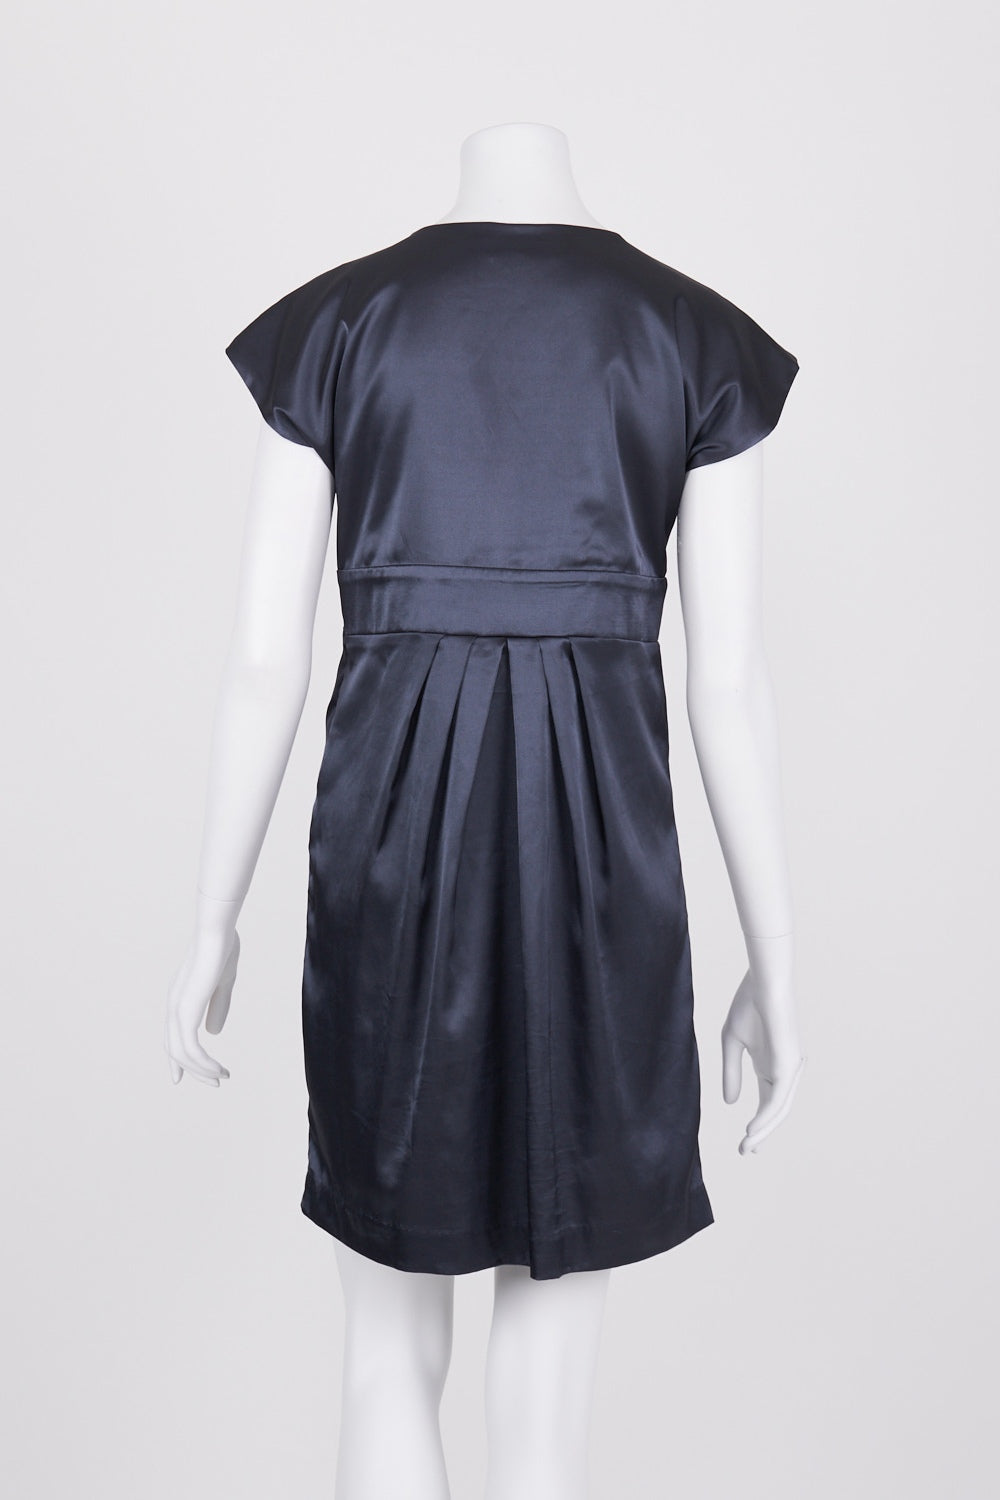 Cooper St Bow Front Satin Dress 12